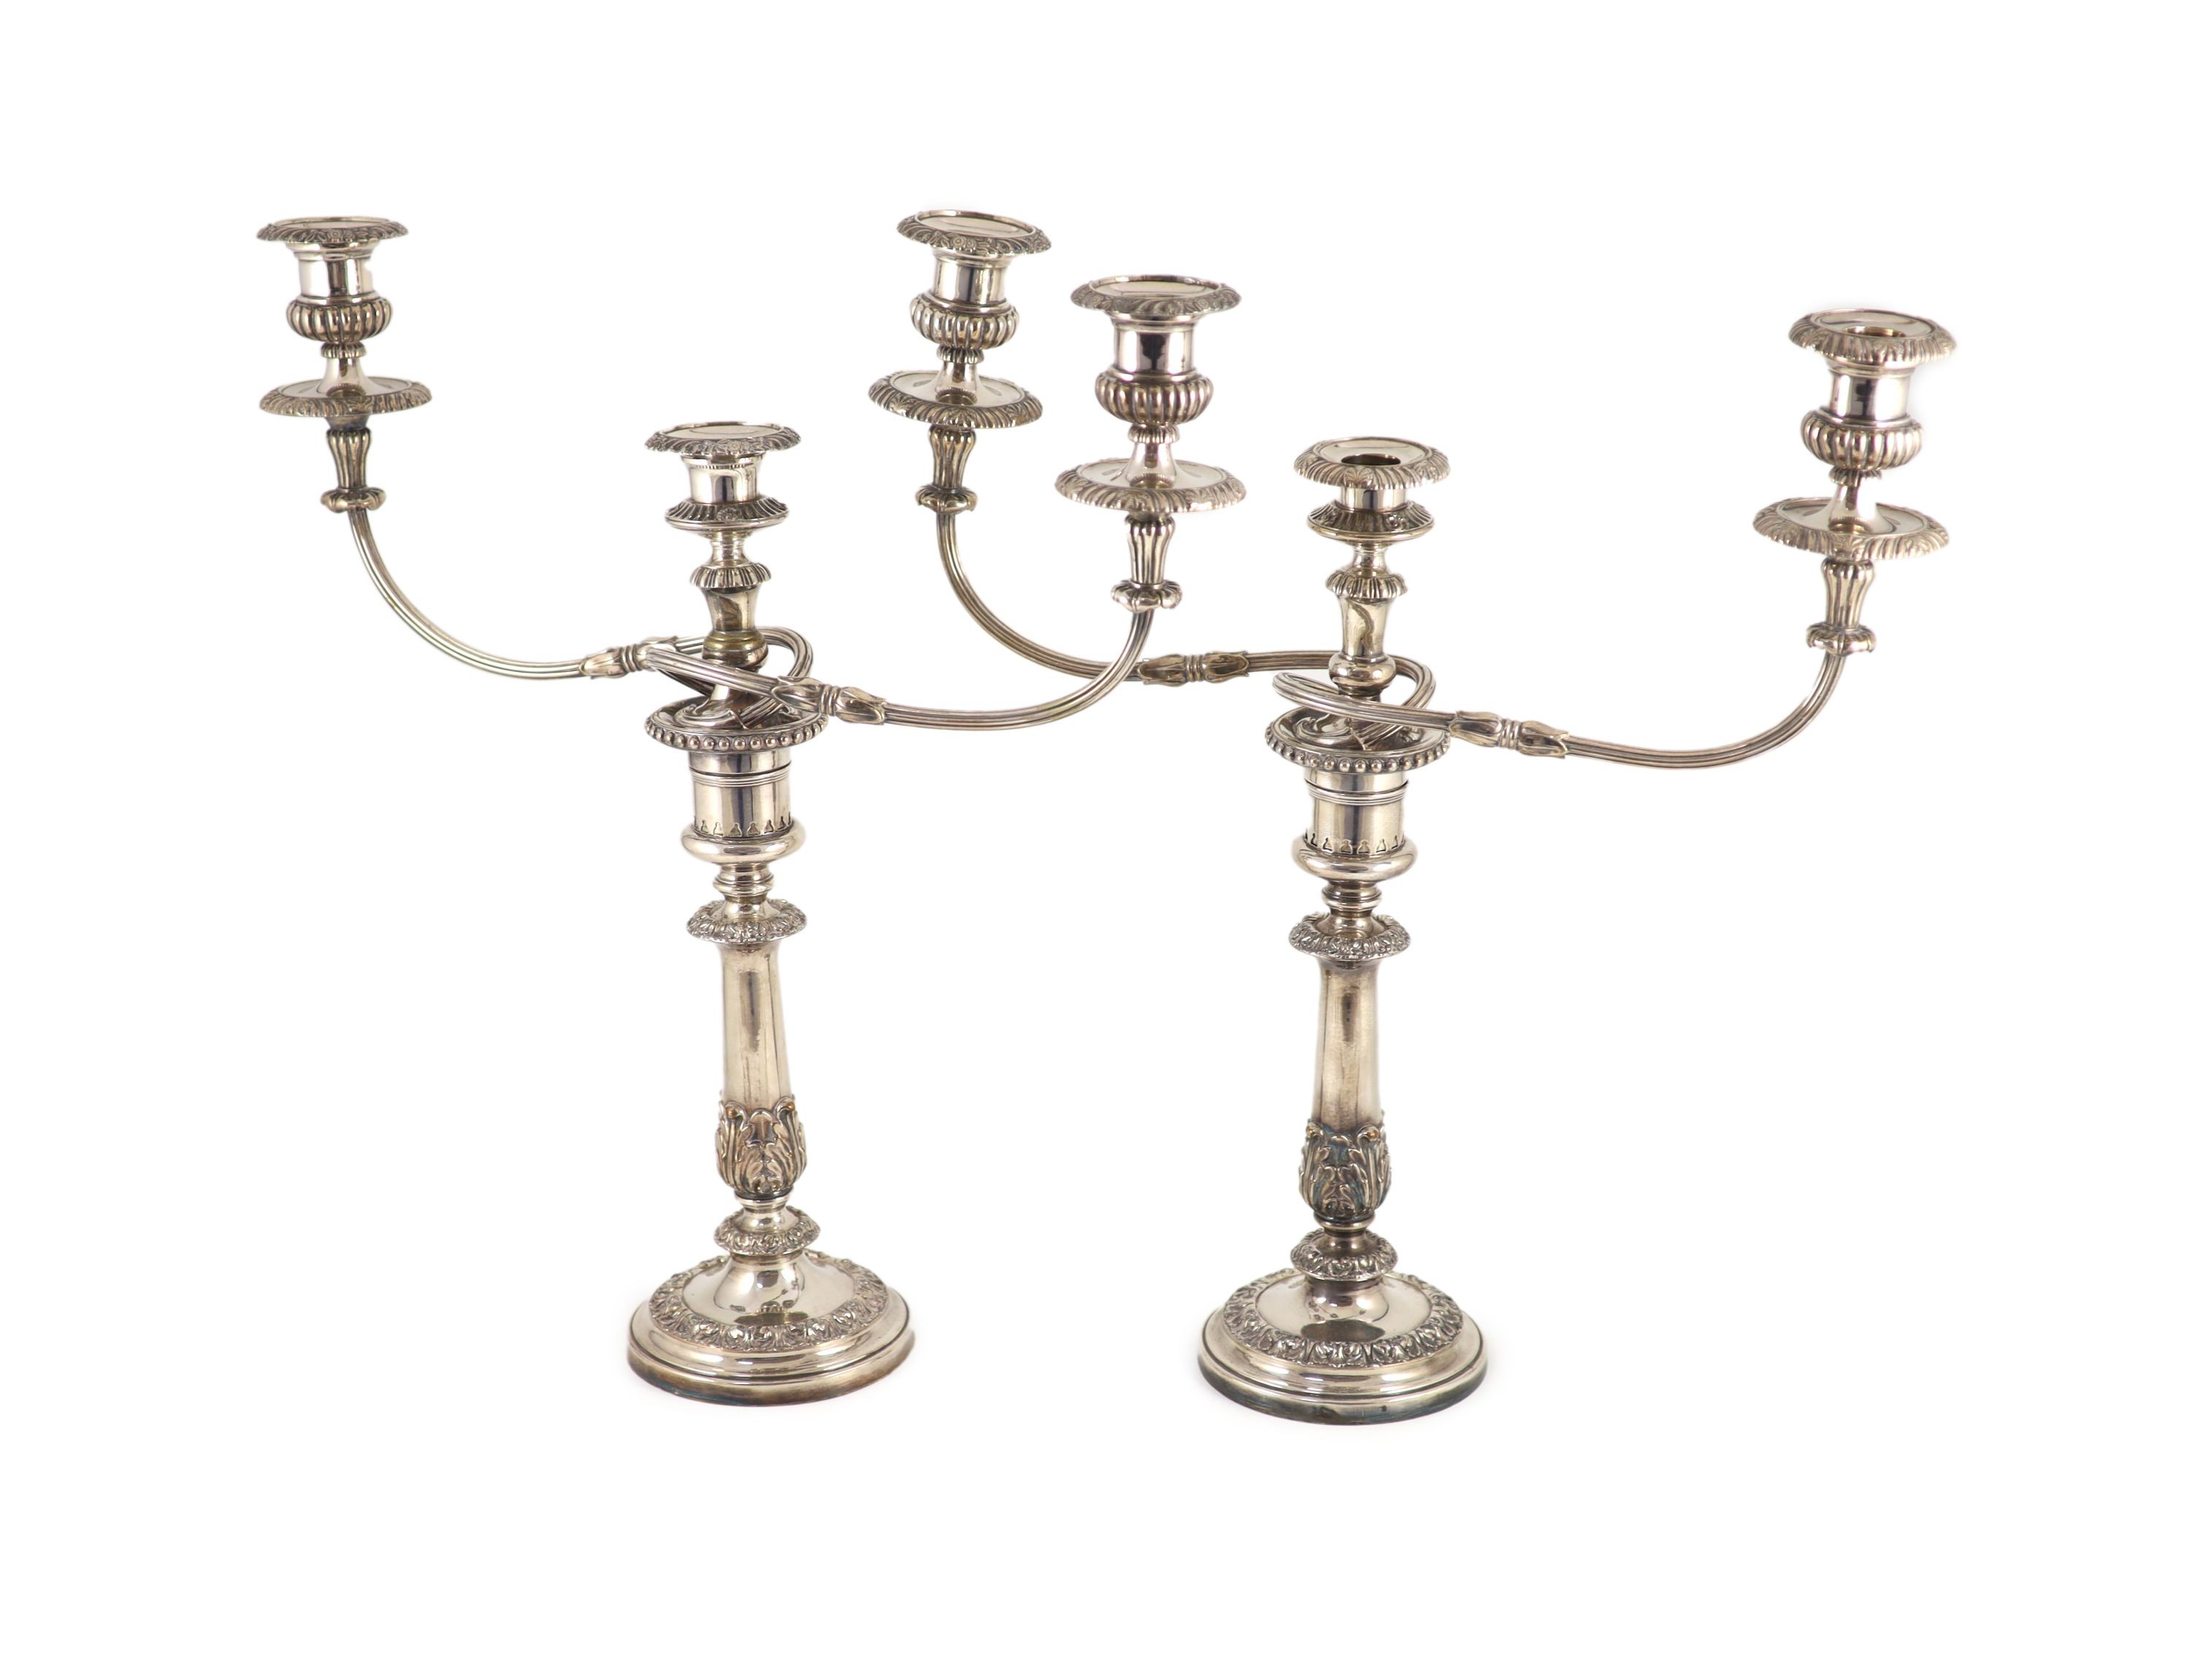 A pair of early to mid 20th century silver plated three light, two branch candelabra,with reeded